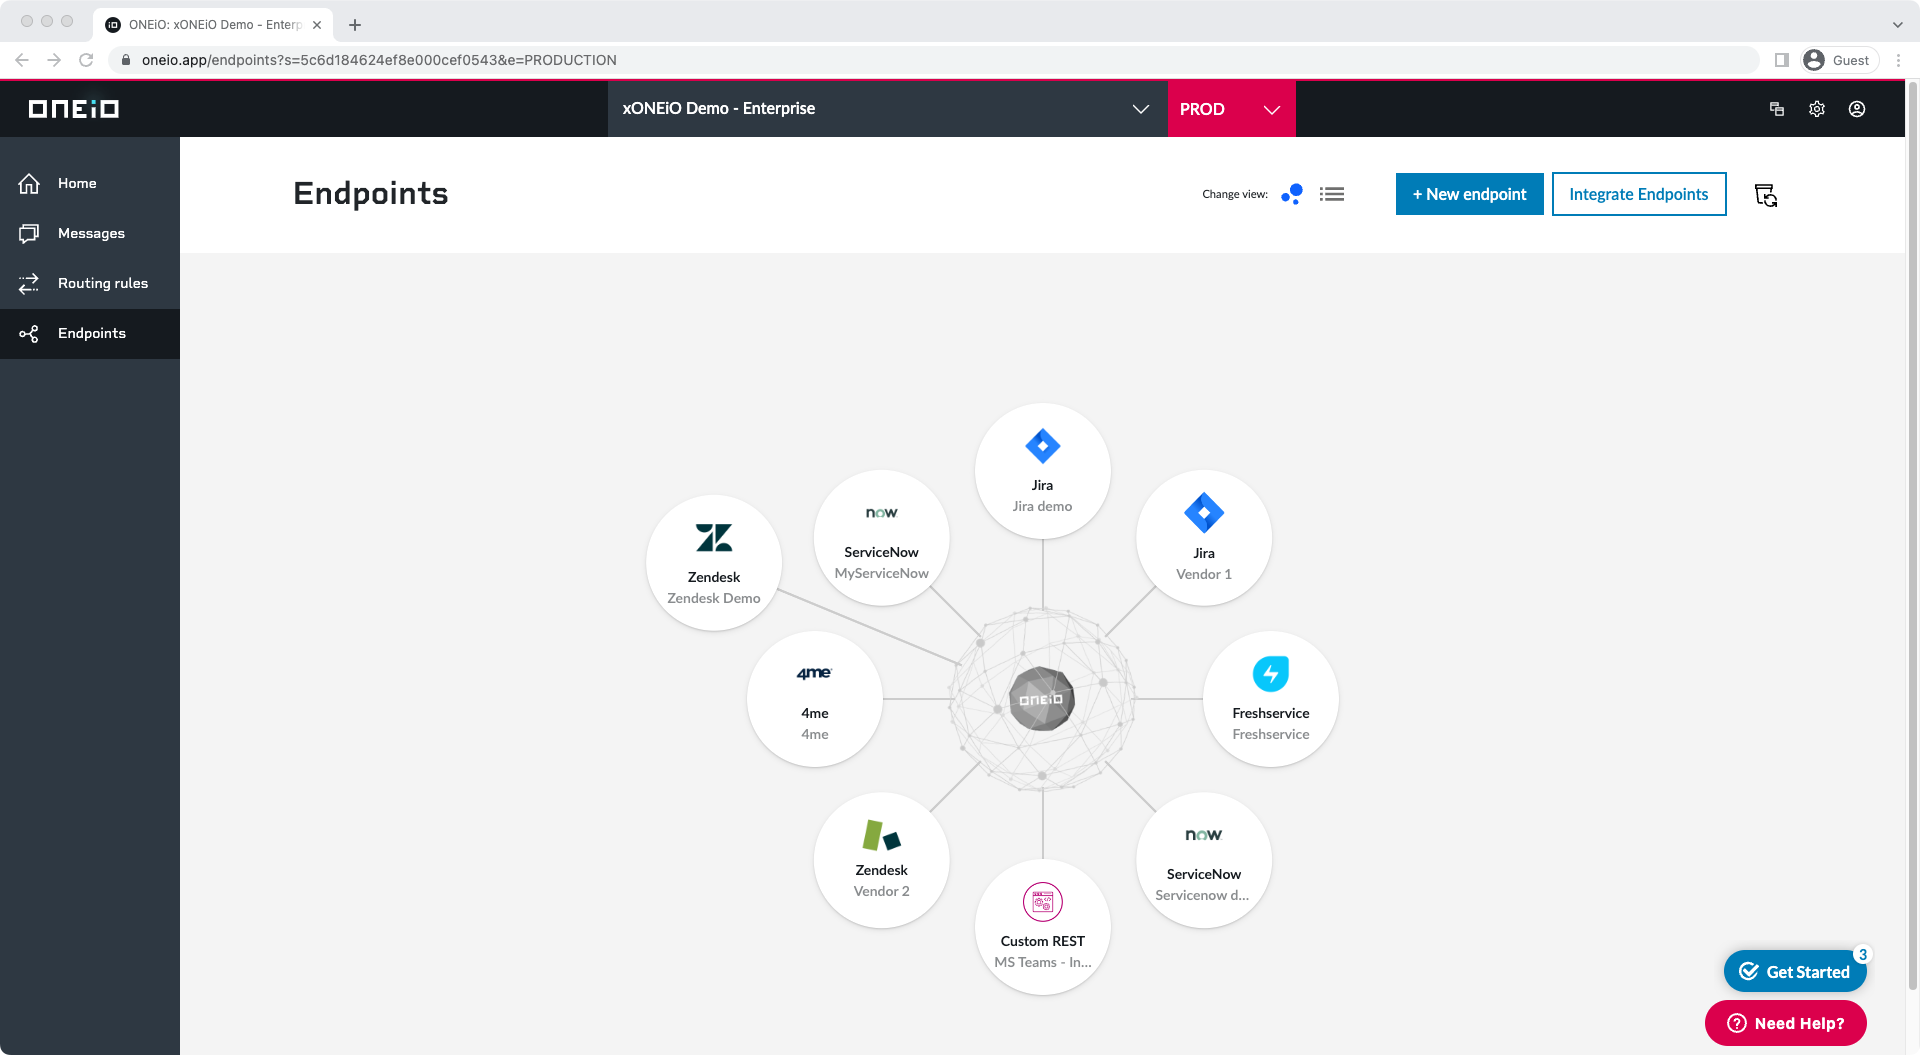 Endpoints View: View your entire ecosystem at a glance in the Endpoints view. You can connect more tools to your ecosystem through our wide selection of ready-to-go endpoint types.